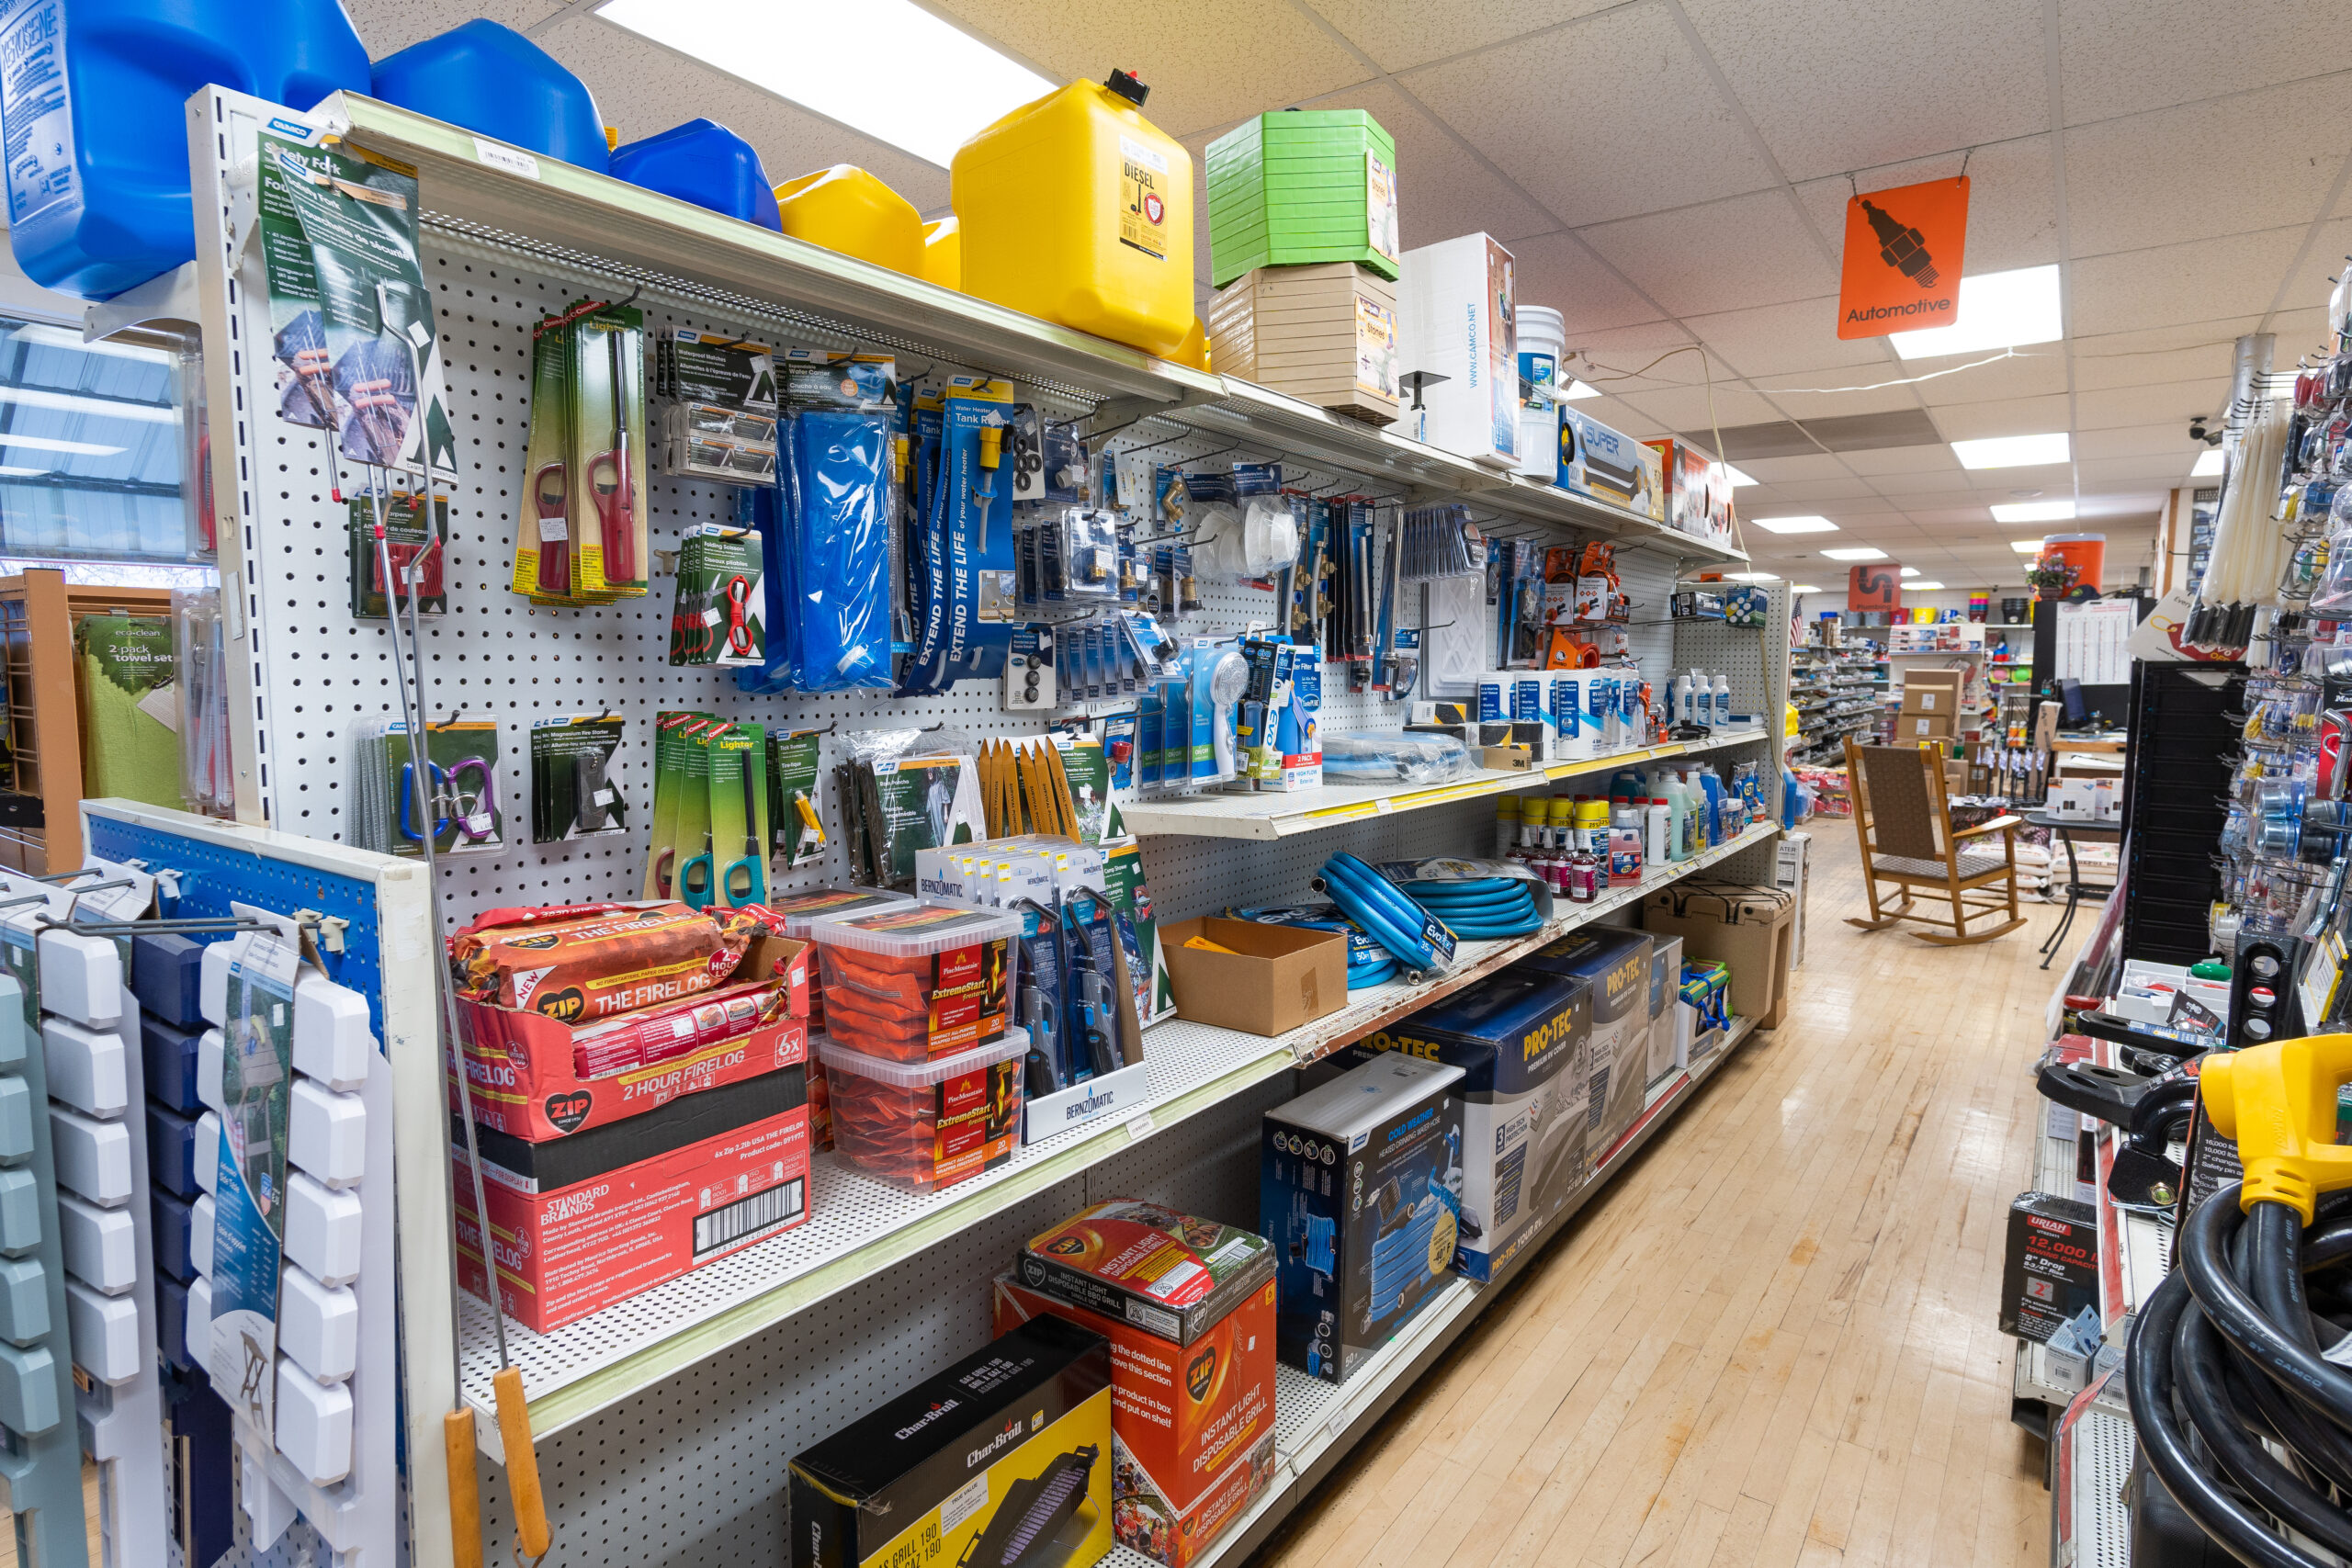 A view of shelves containing products sold by Four Star Supply, including automotive maintenance products.